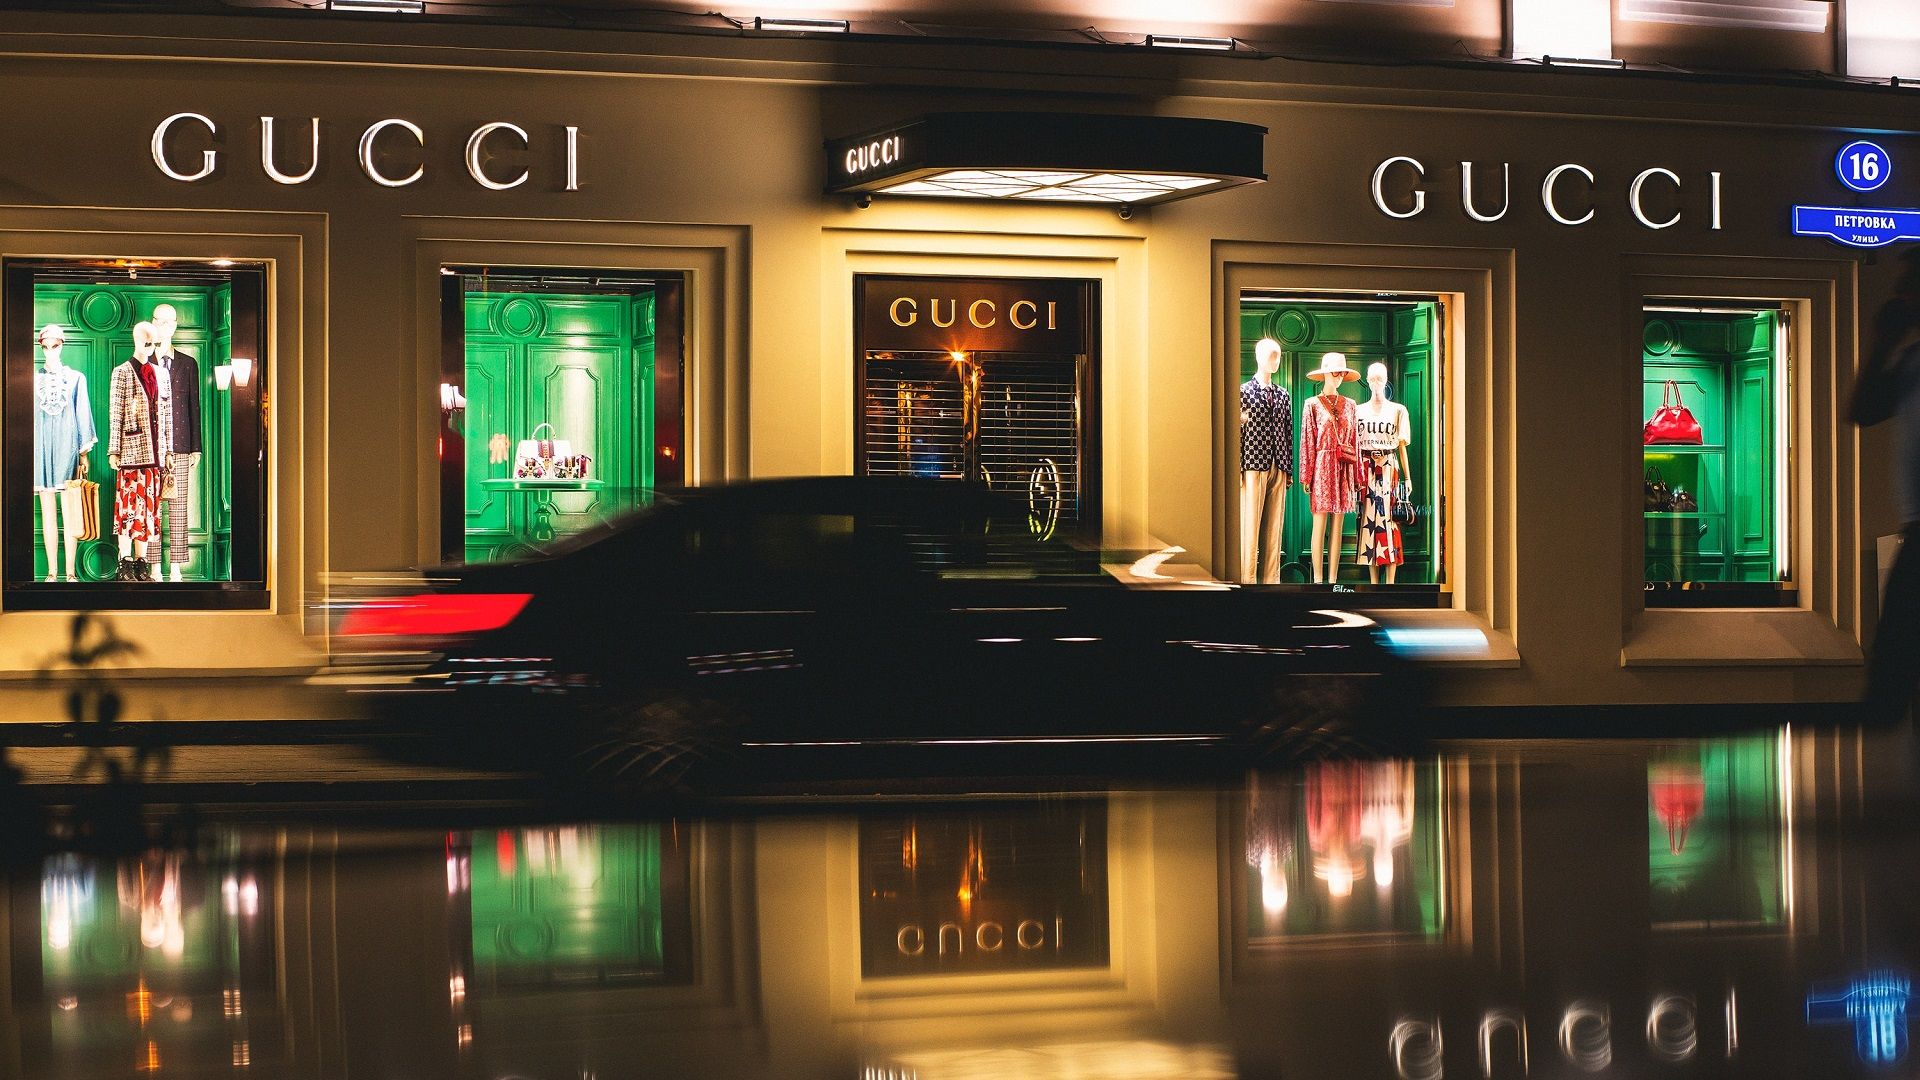 Now you can shop at select Gucci stores with cryptocurrency